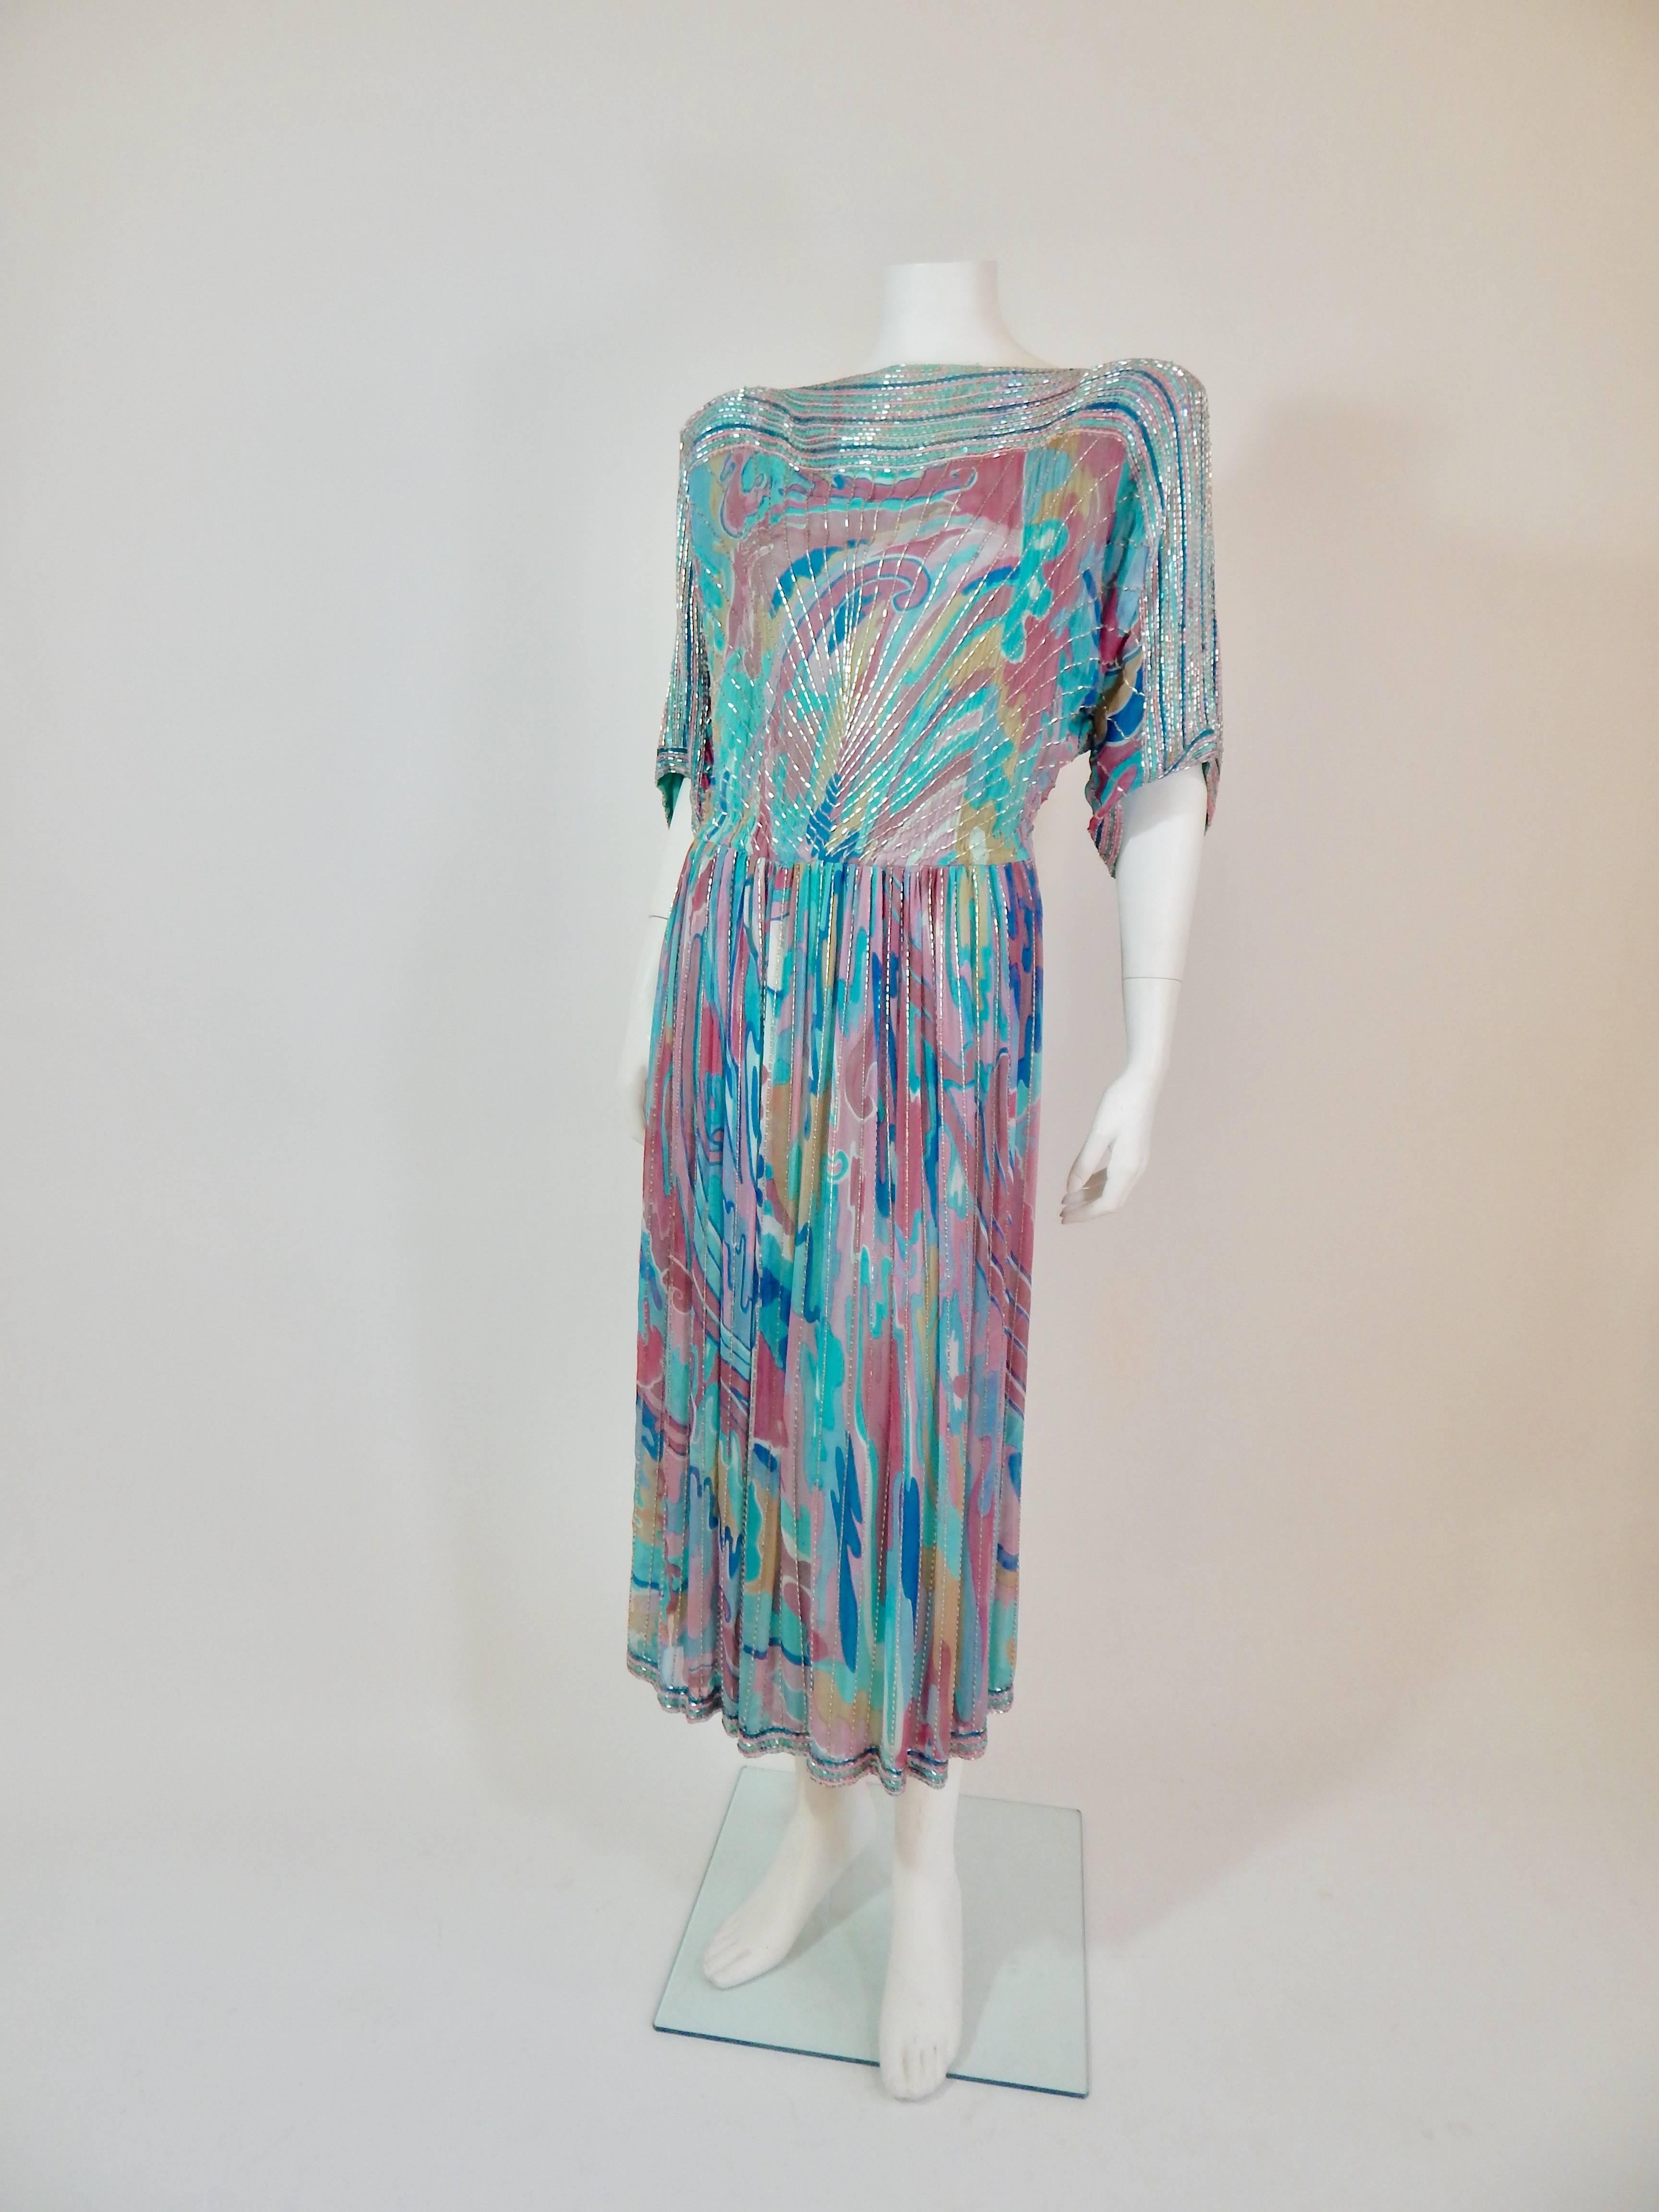 Early 1980s. Beautiful! Silver Beadwork throughout. Multicolored colored print silk chiffon. Blue, turquoise, pink? Fully lined in turquoise chiffon.
Shoulder pads are original and could be removed. Waist has some flexibility and is 26